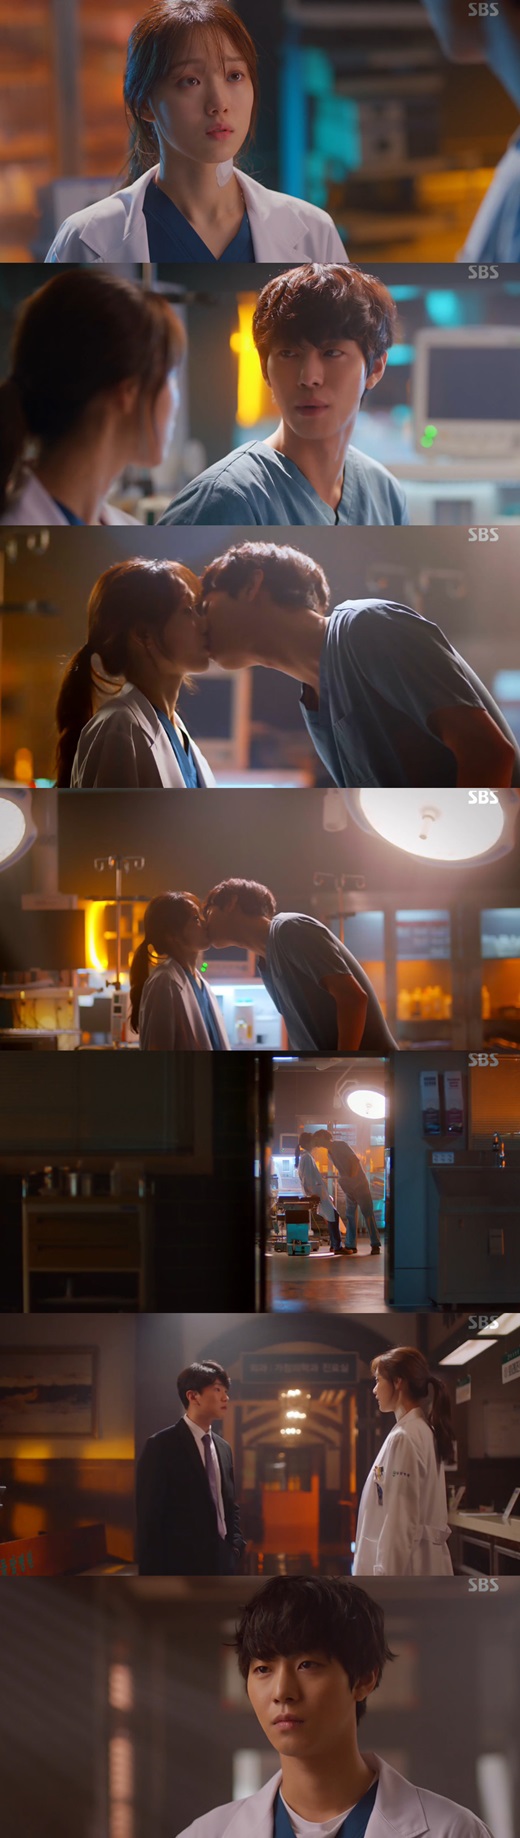 Romantic Doctor Kim Sabu 2 Ahn Hyo-seop and Lee Sung-kyung are growing their hearts toward each other in the hospital.In SBS Mondays drama Romantic Doctor Kim Sabu 2, which was broadcast on the night of the 28th, Cha Eun-jae (Lee Sung-kyung) and Seo Woo Jin (Ahn Hyo-seop) were depicted to gradually understand each other.Cha Eun-jae was saddened to see his wife, who murdered her husband due to domestic violence, being taken to the police.Seo Woo Jin looked at the shrinking Cha Eun-jae and comforted him that it is the doctors talent to try to save people even if a knife comes into your neck.The hospital was then brought in arms and paramedics, who had no will to live, and paramedics were unconscious after being injured in the head while drying the drunk.Eventually, the patient was pronounced dead by brain death, and Cha Eun-jae proposed United Network for Organ Sharing.But Seo Woo Jin (Ahn Hyo-seop) was angry, saying: My daughter died of brain death - how do you tell her mother?With the efforts of Cha Eun-jae, the operation through United Network for Organ Sharing was completed, and Cha Eun-jae gained confidence and solidified his intention to remain at Doldam Hospital.I did not like you when I was in school, but when I heard that you lost your family when you were a child, I was very sick, he said.But Seo Woo Jin said, Dont be serious, then theres no fun between us and nothing goes away, forget it all.Ironically, Cha and Seo Woo Jin have come to understand each other in confrontation, and their hearts are getting closer to love.